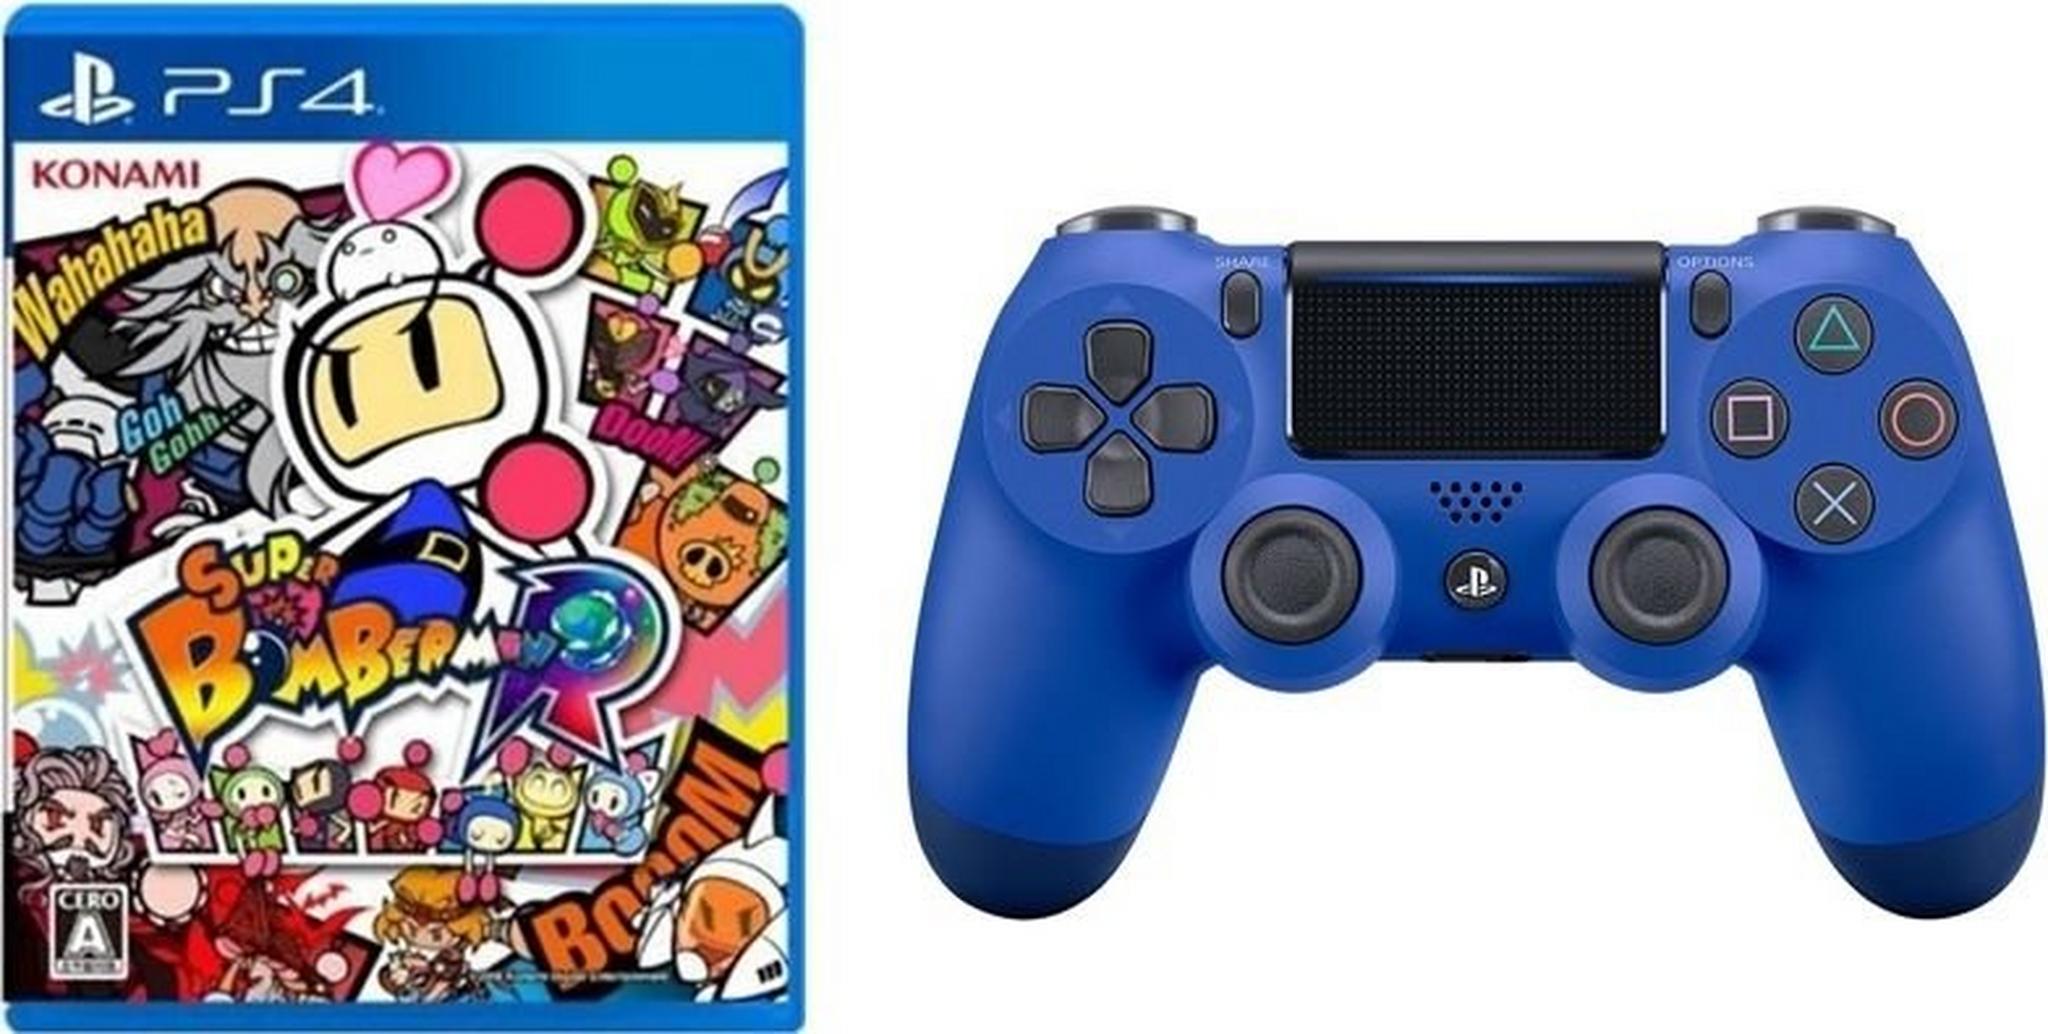 Sony PS4 Controller DualShock 4 Wireless Blue + Super Bomberman R: PlayStation 4 Game